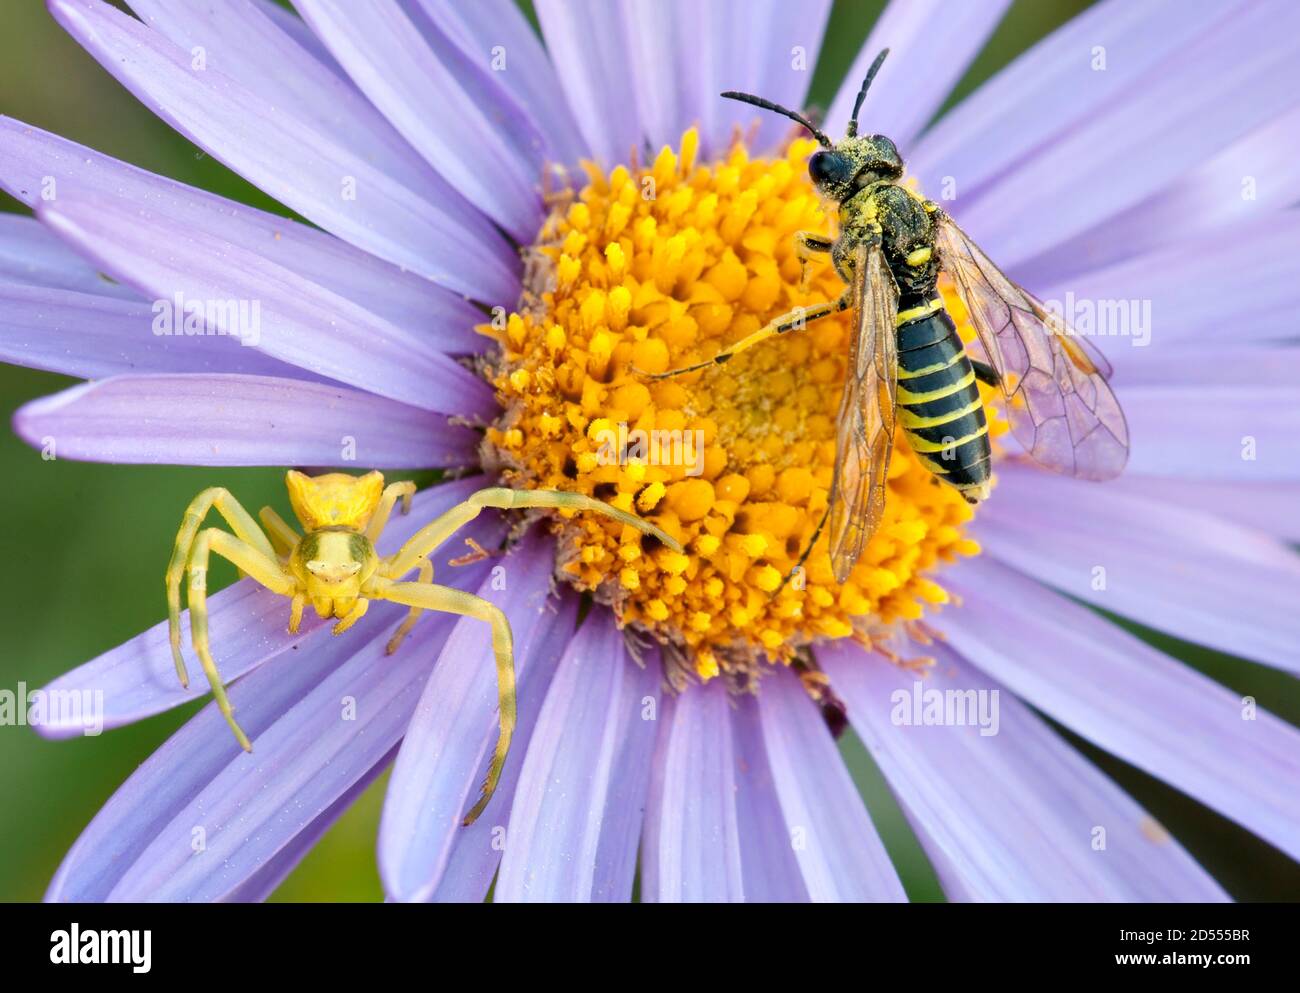 Crab spider and wasp on purple and yellow anemone flower Stock Photo